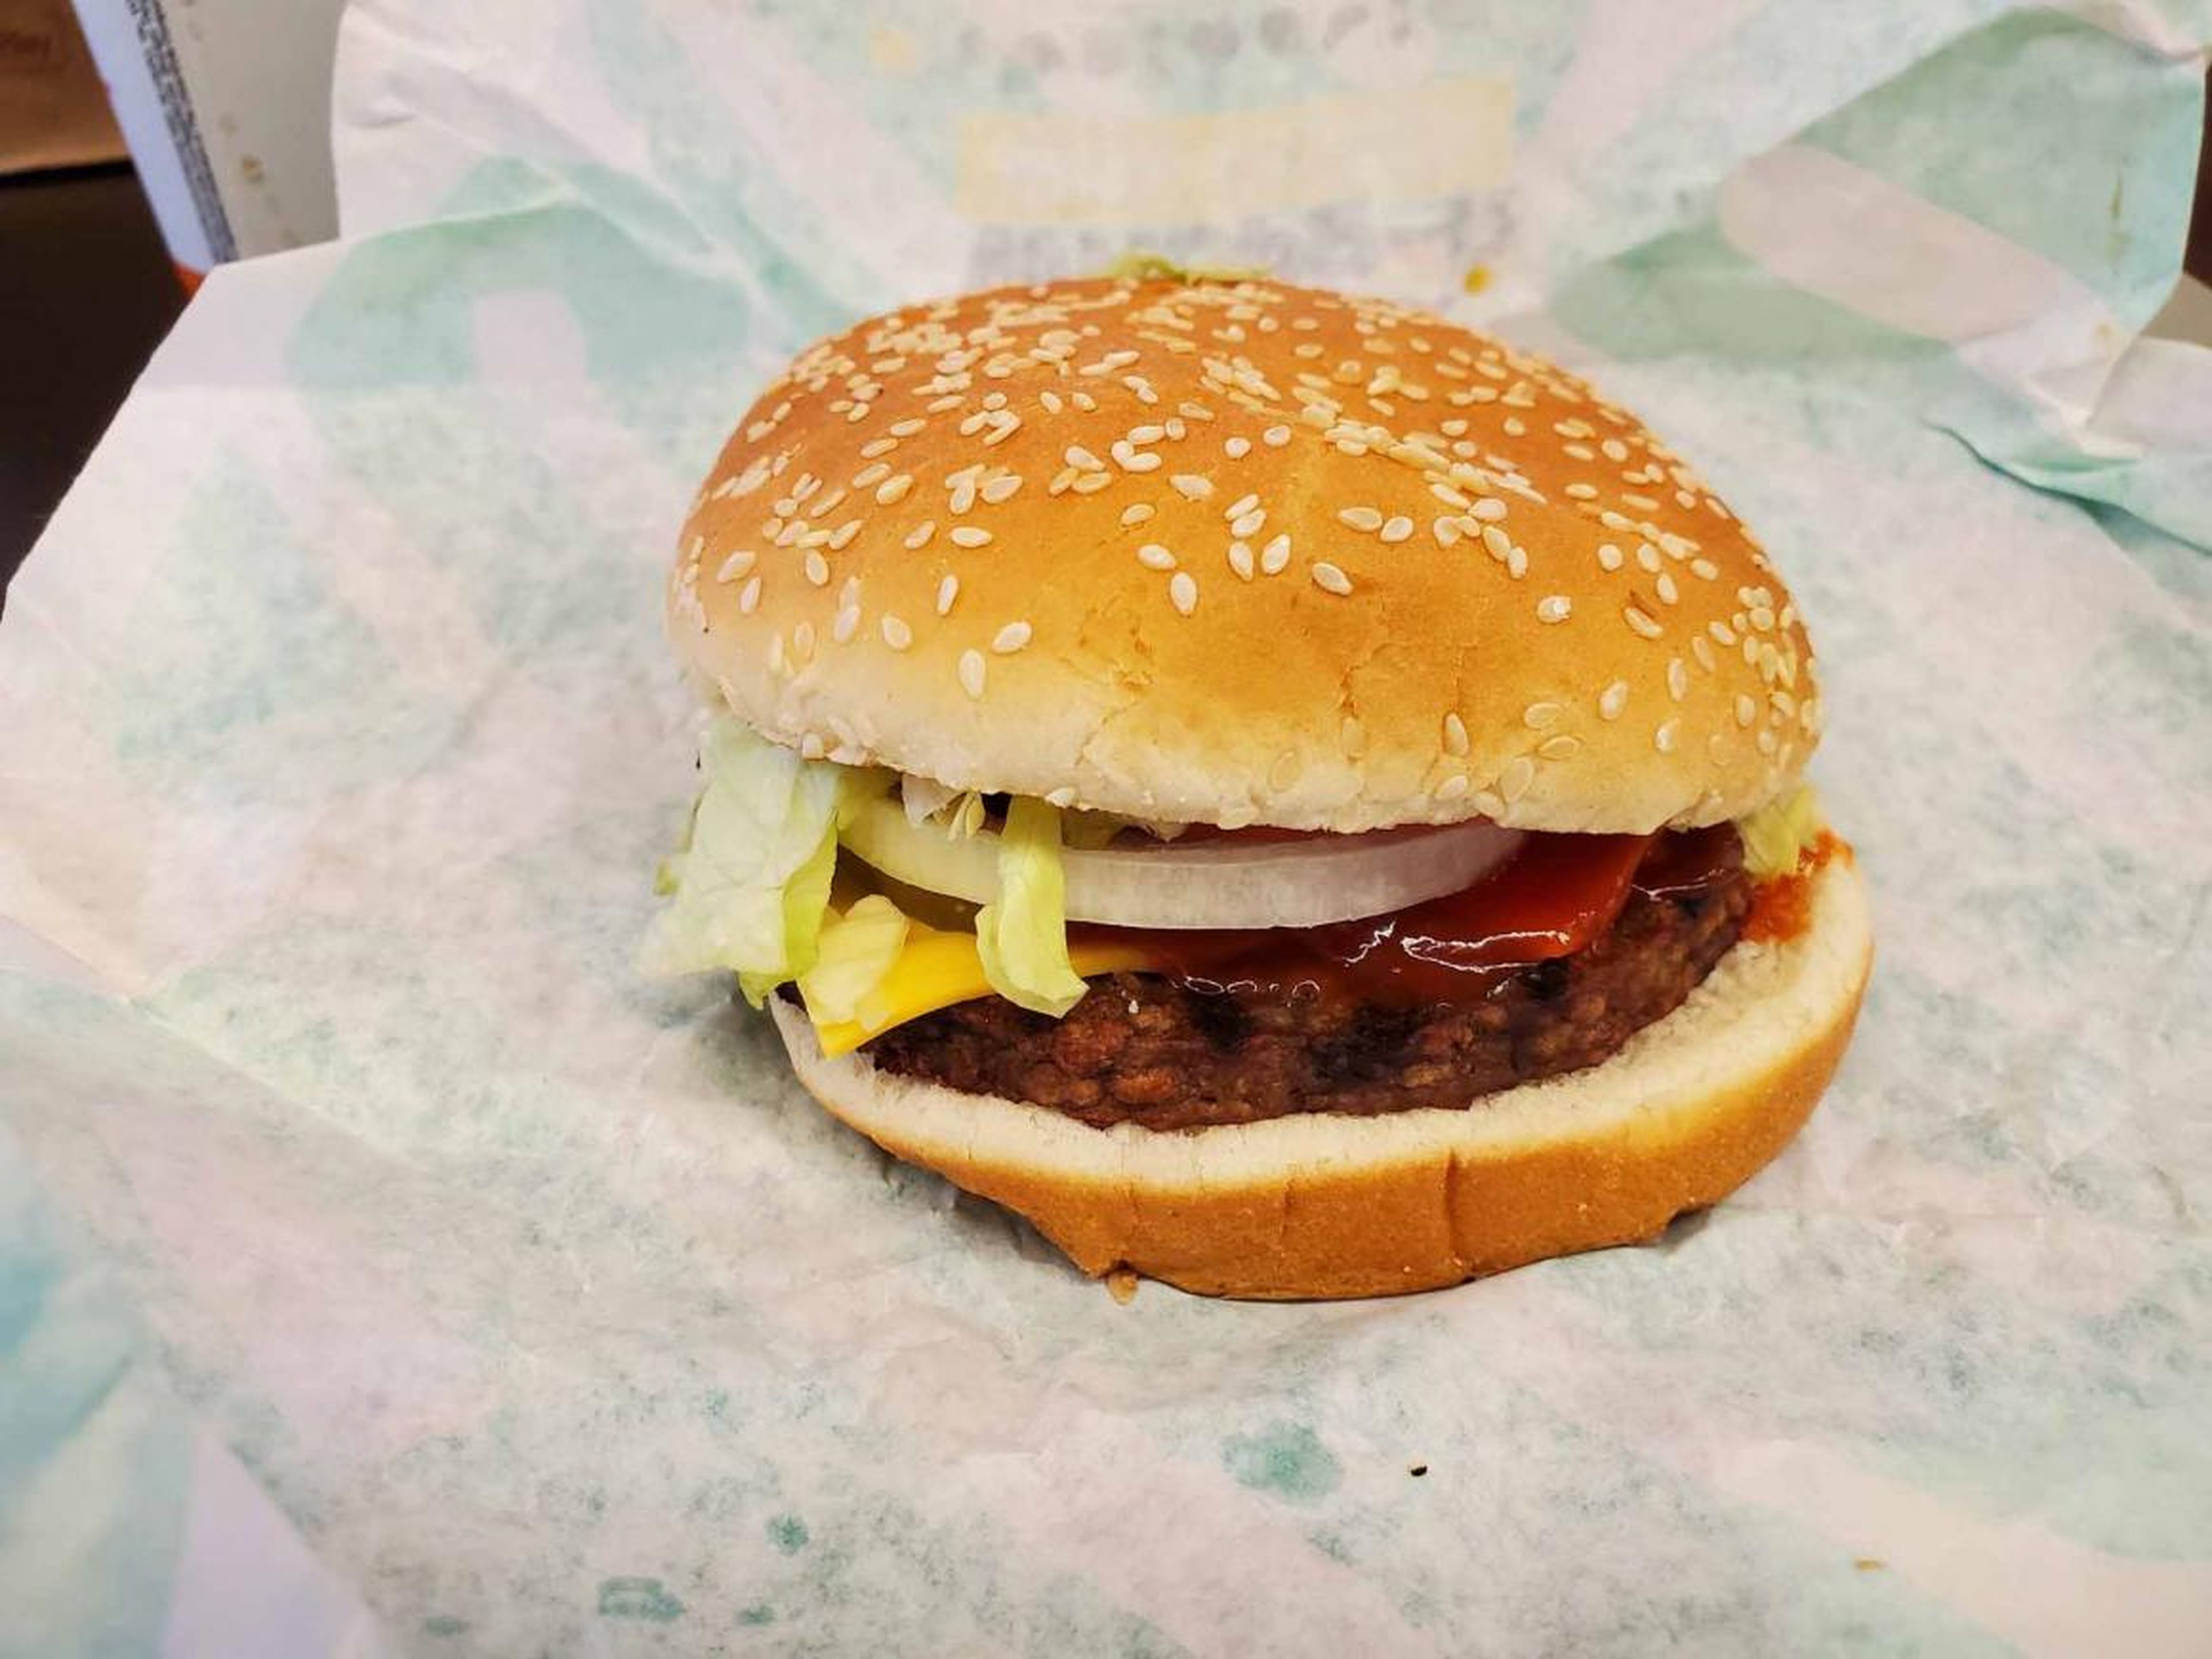 The Impossible patty in the Impossible Whopper looked just like other veggie patties I've tried: lighter in color than meat and dry in appearance.